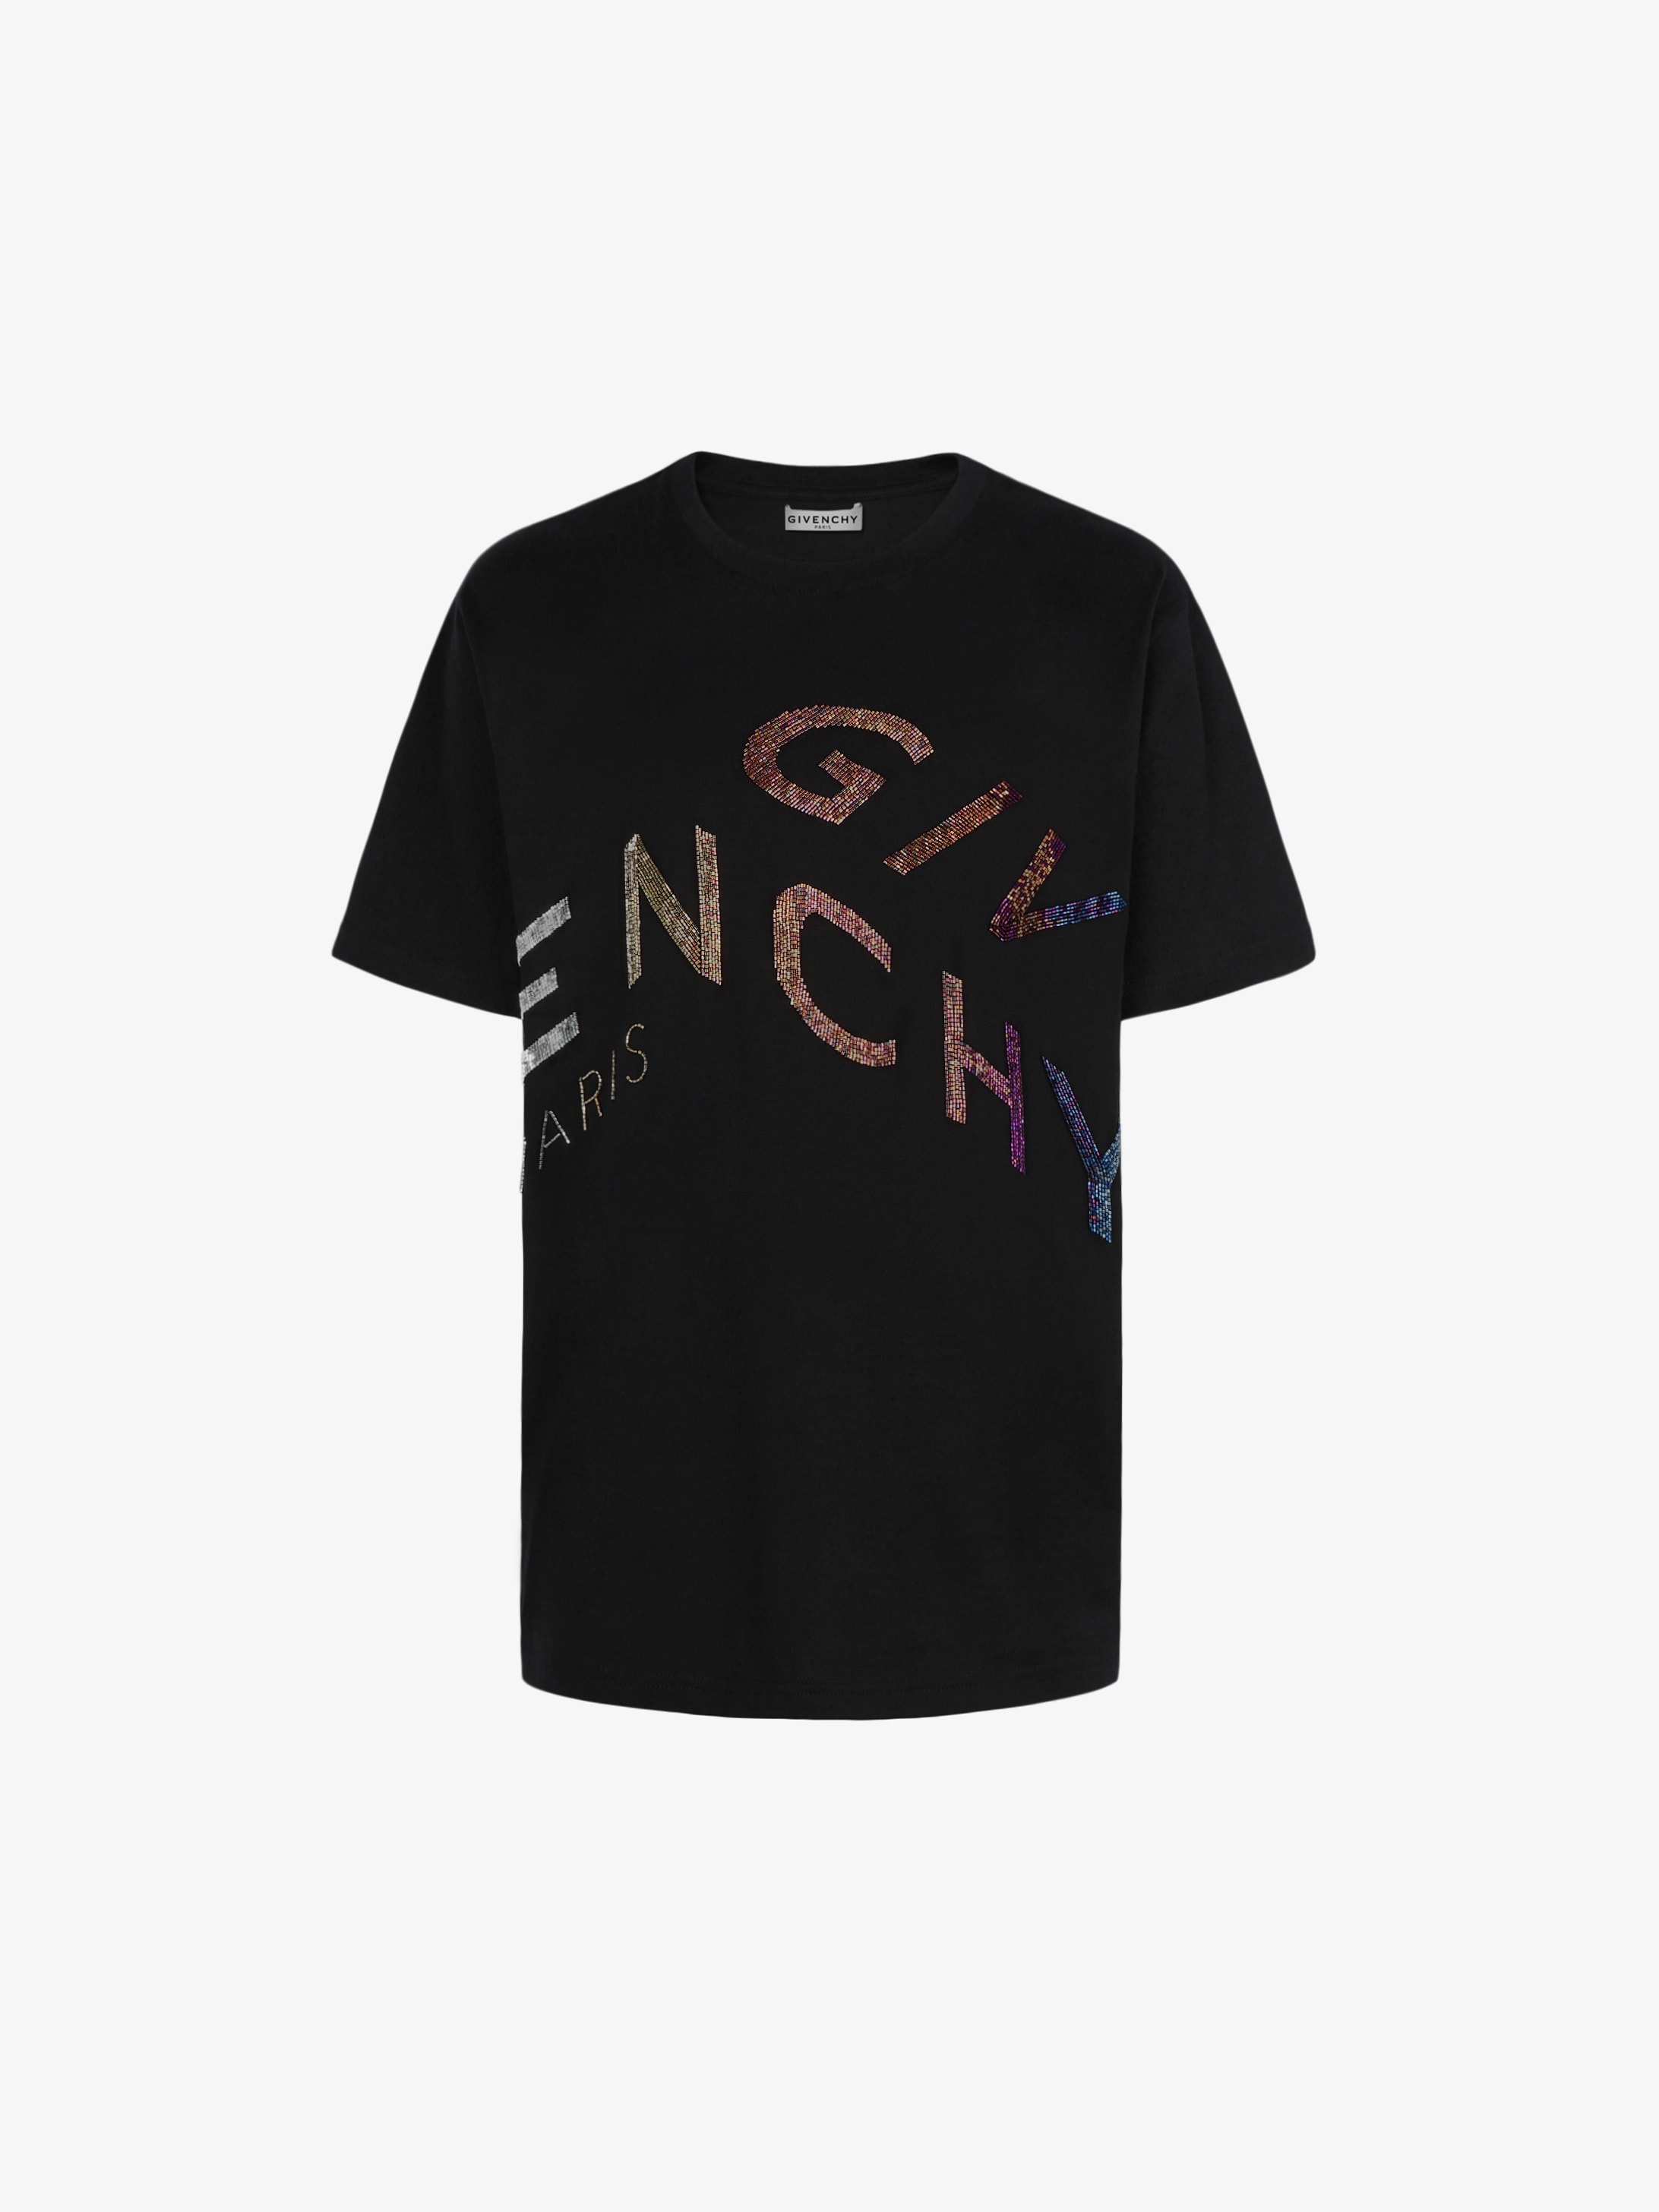 GIVENCHY Refracted embroidered t-shirt | GIVENCHY Paris